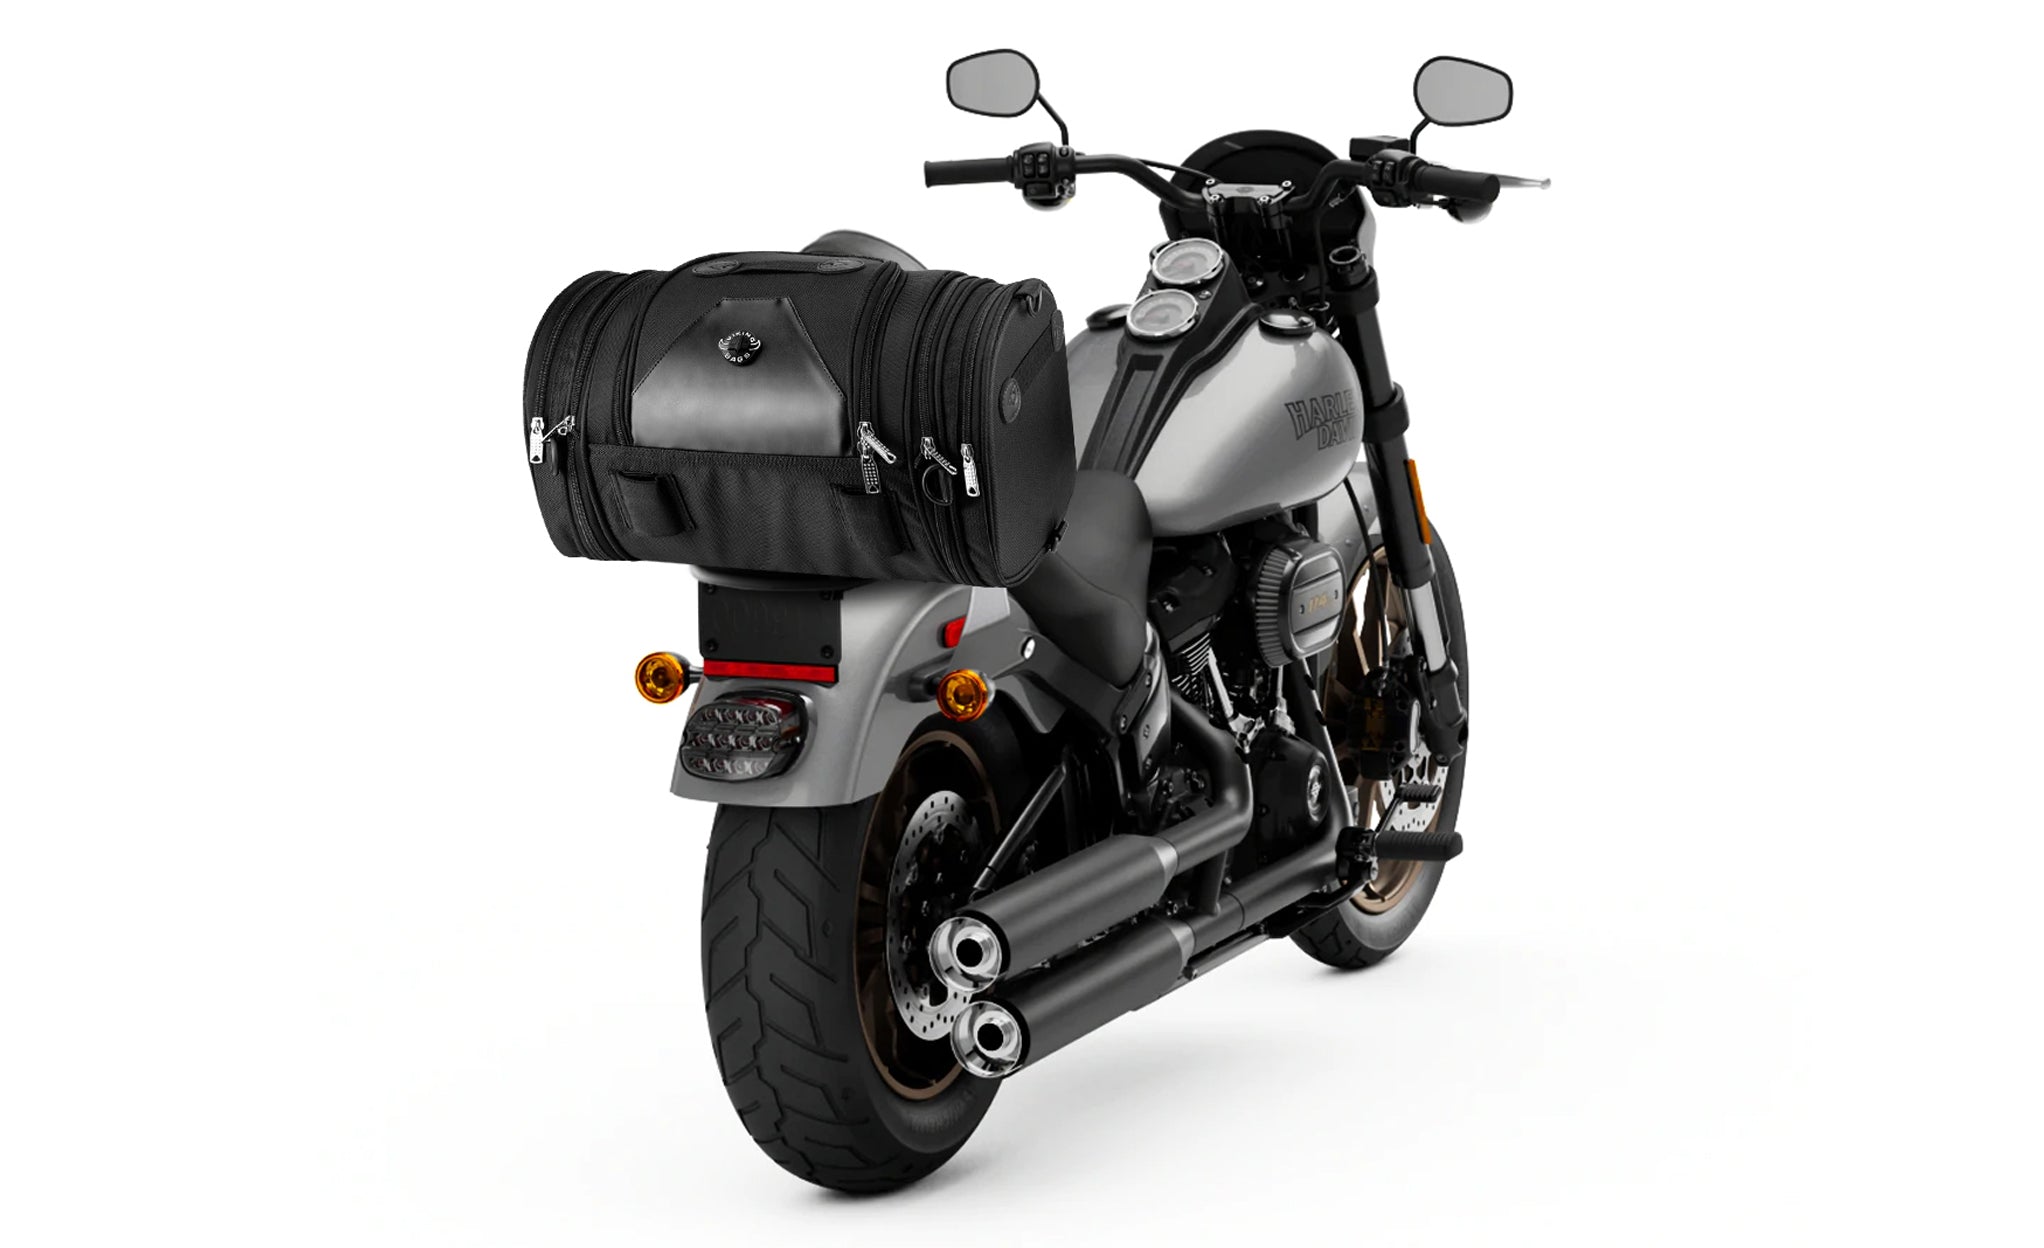 Viking Axwell Small Victory Motorcycle Tail Bag Bag on Bike View @expand